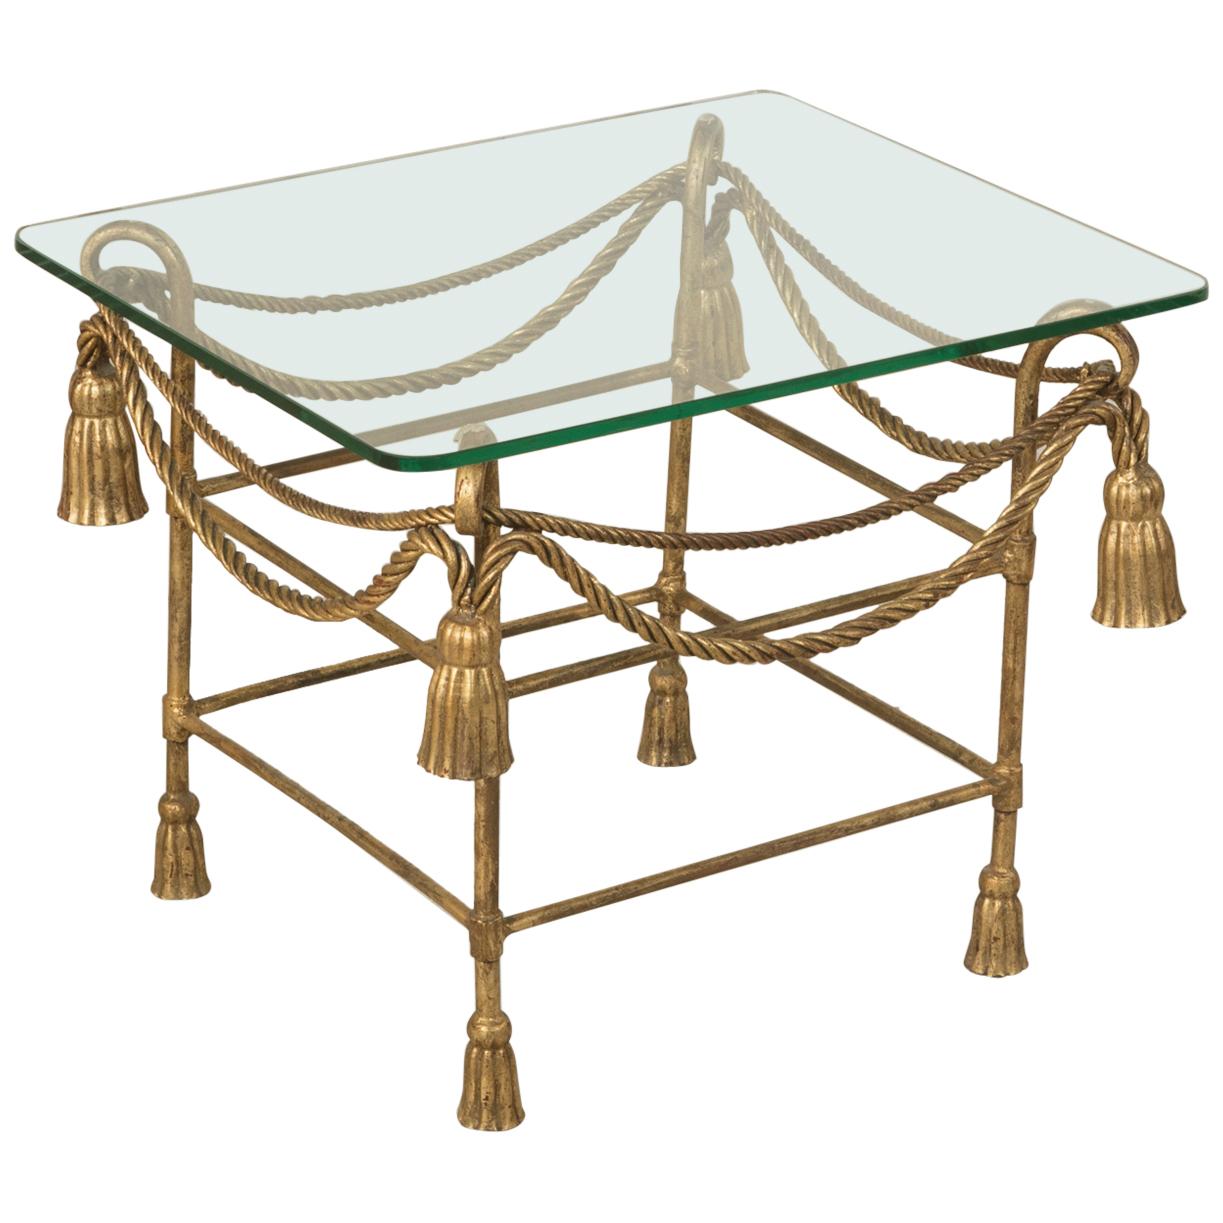 Midcentury French Jean-Charles Moreux Gilt Iron and Glass Side Table, End Table